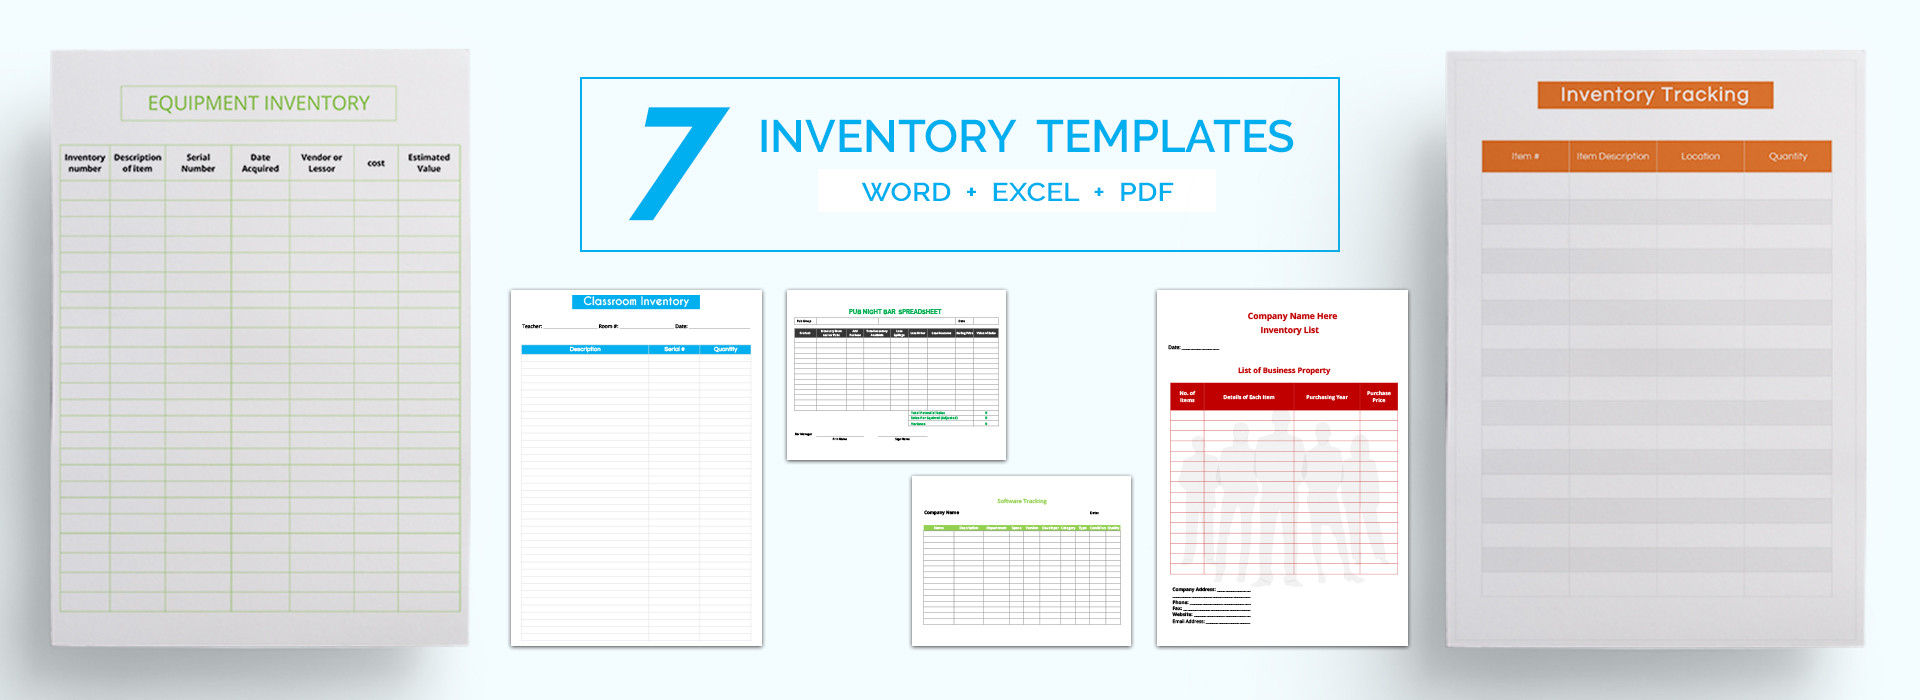 equipment inventory management software free